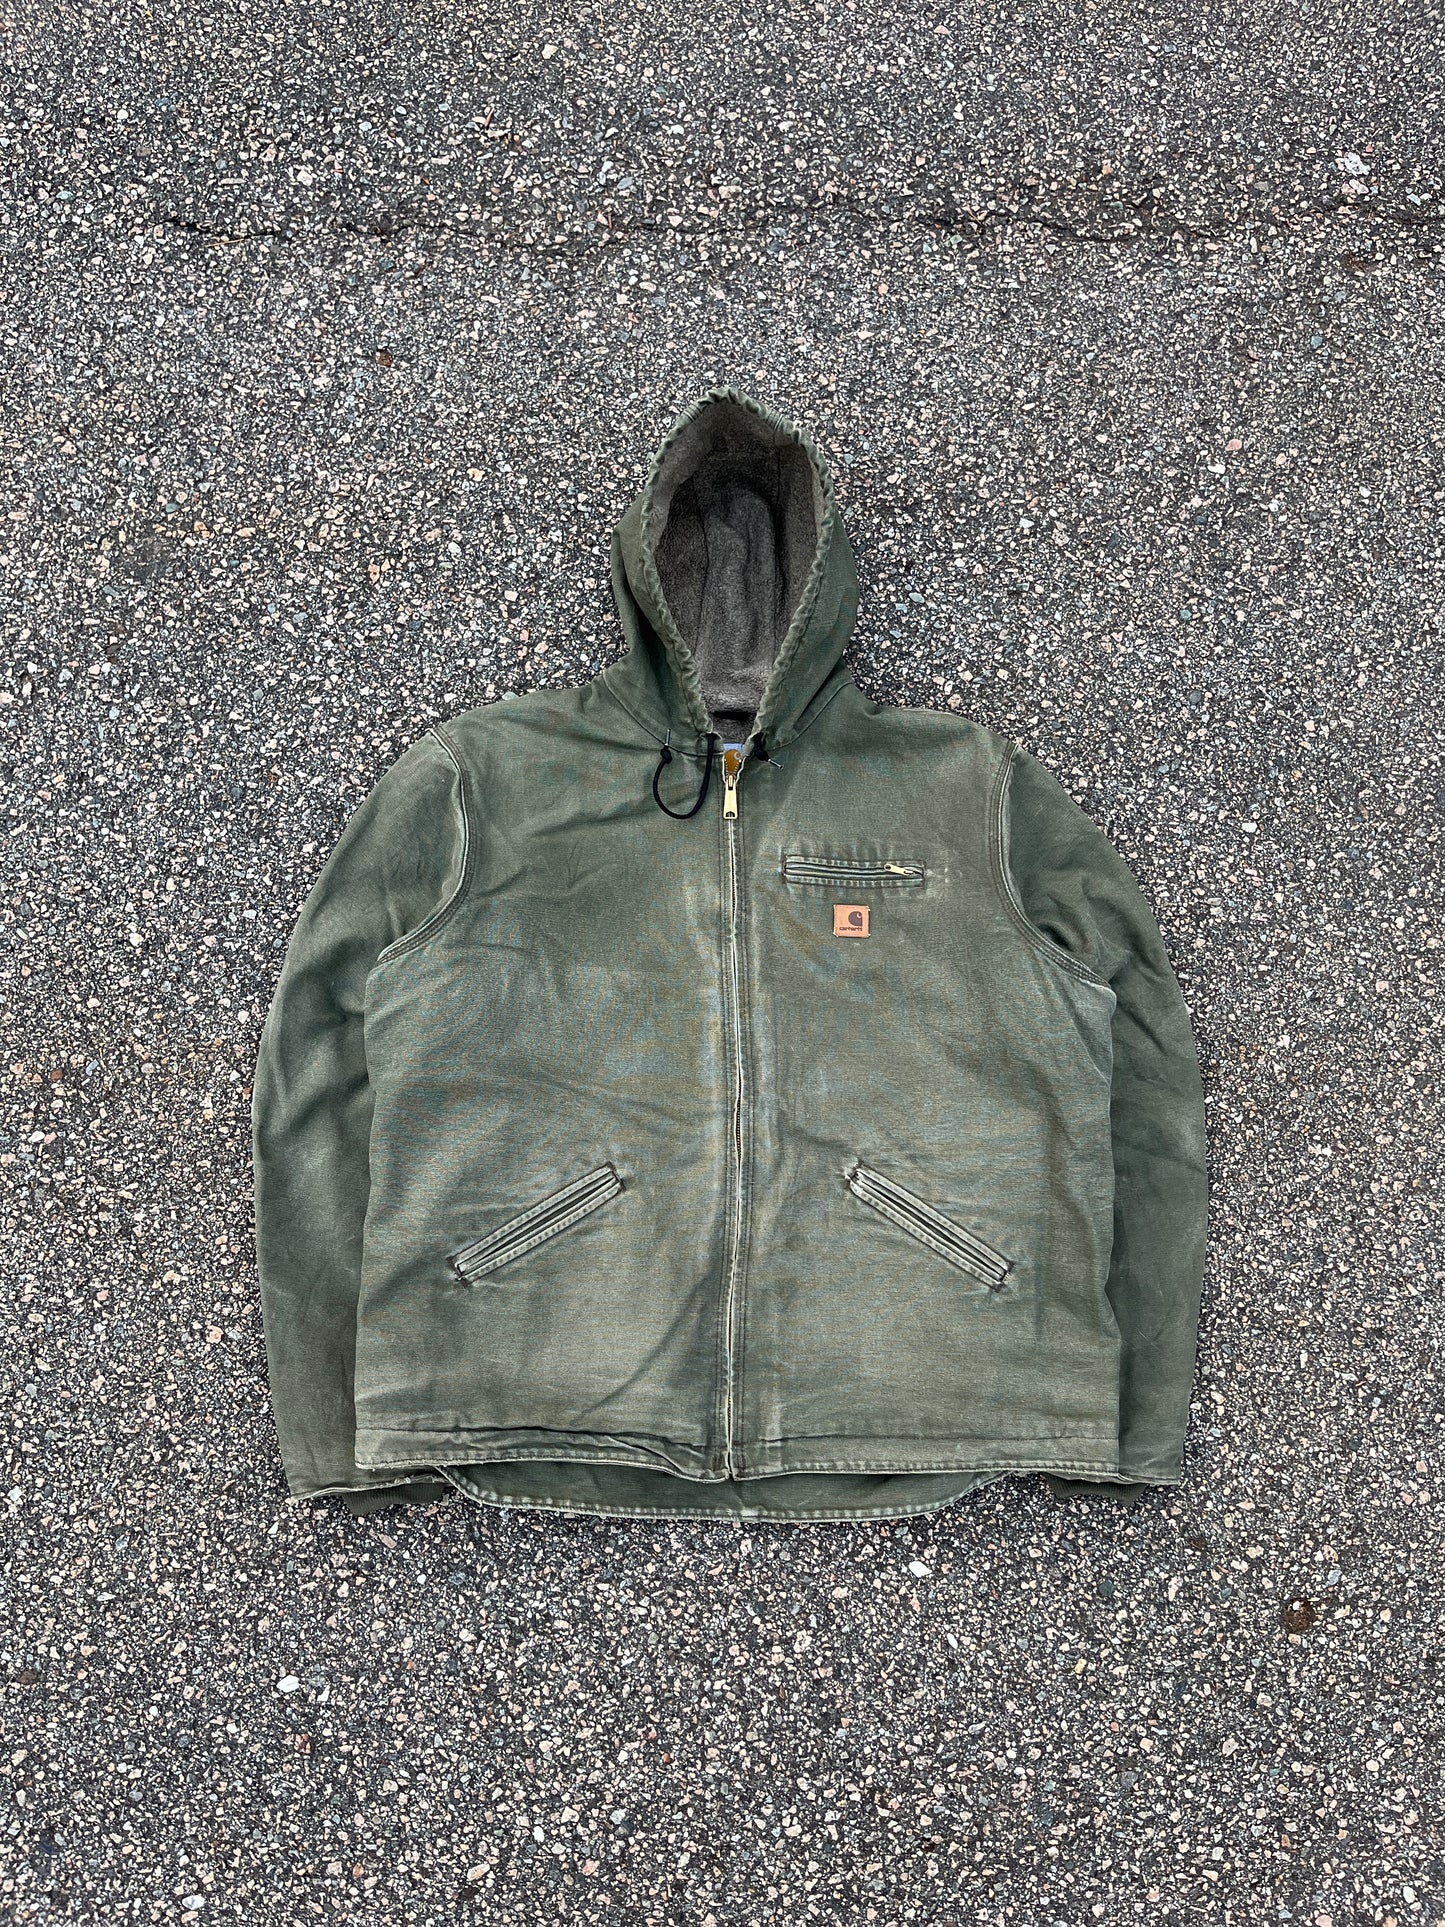 Faded Olive Green Carhartt Sherpa Lined Jacket - 2XL